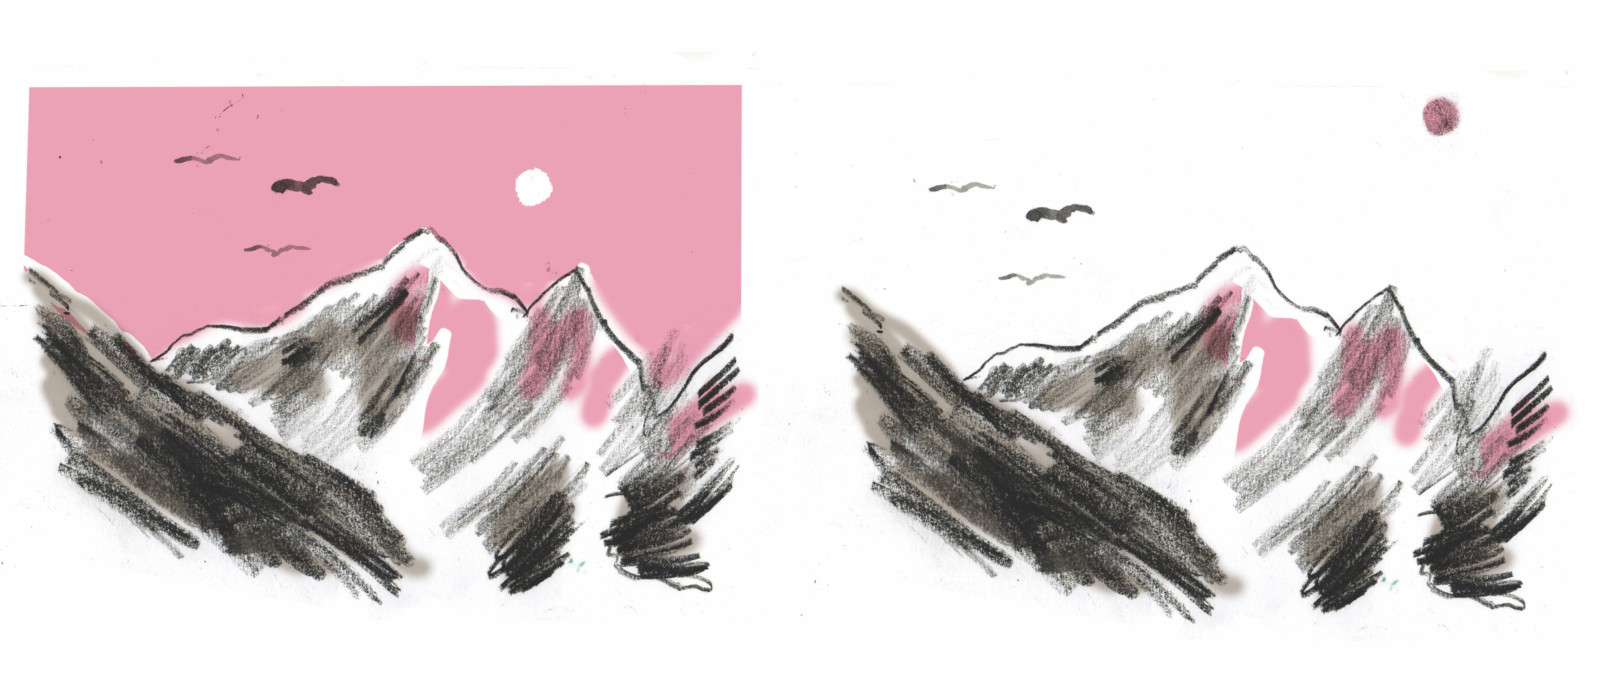 An illustration of two mountains side by side. The mountain on the right sits amidst a light pink sky, whereas the sky behind the mountain on the left is white